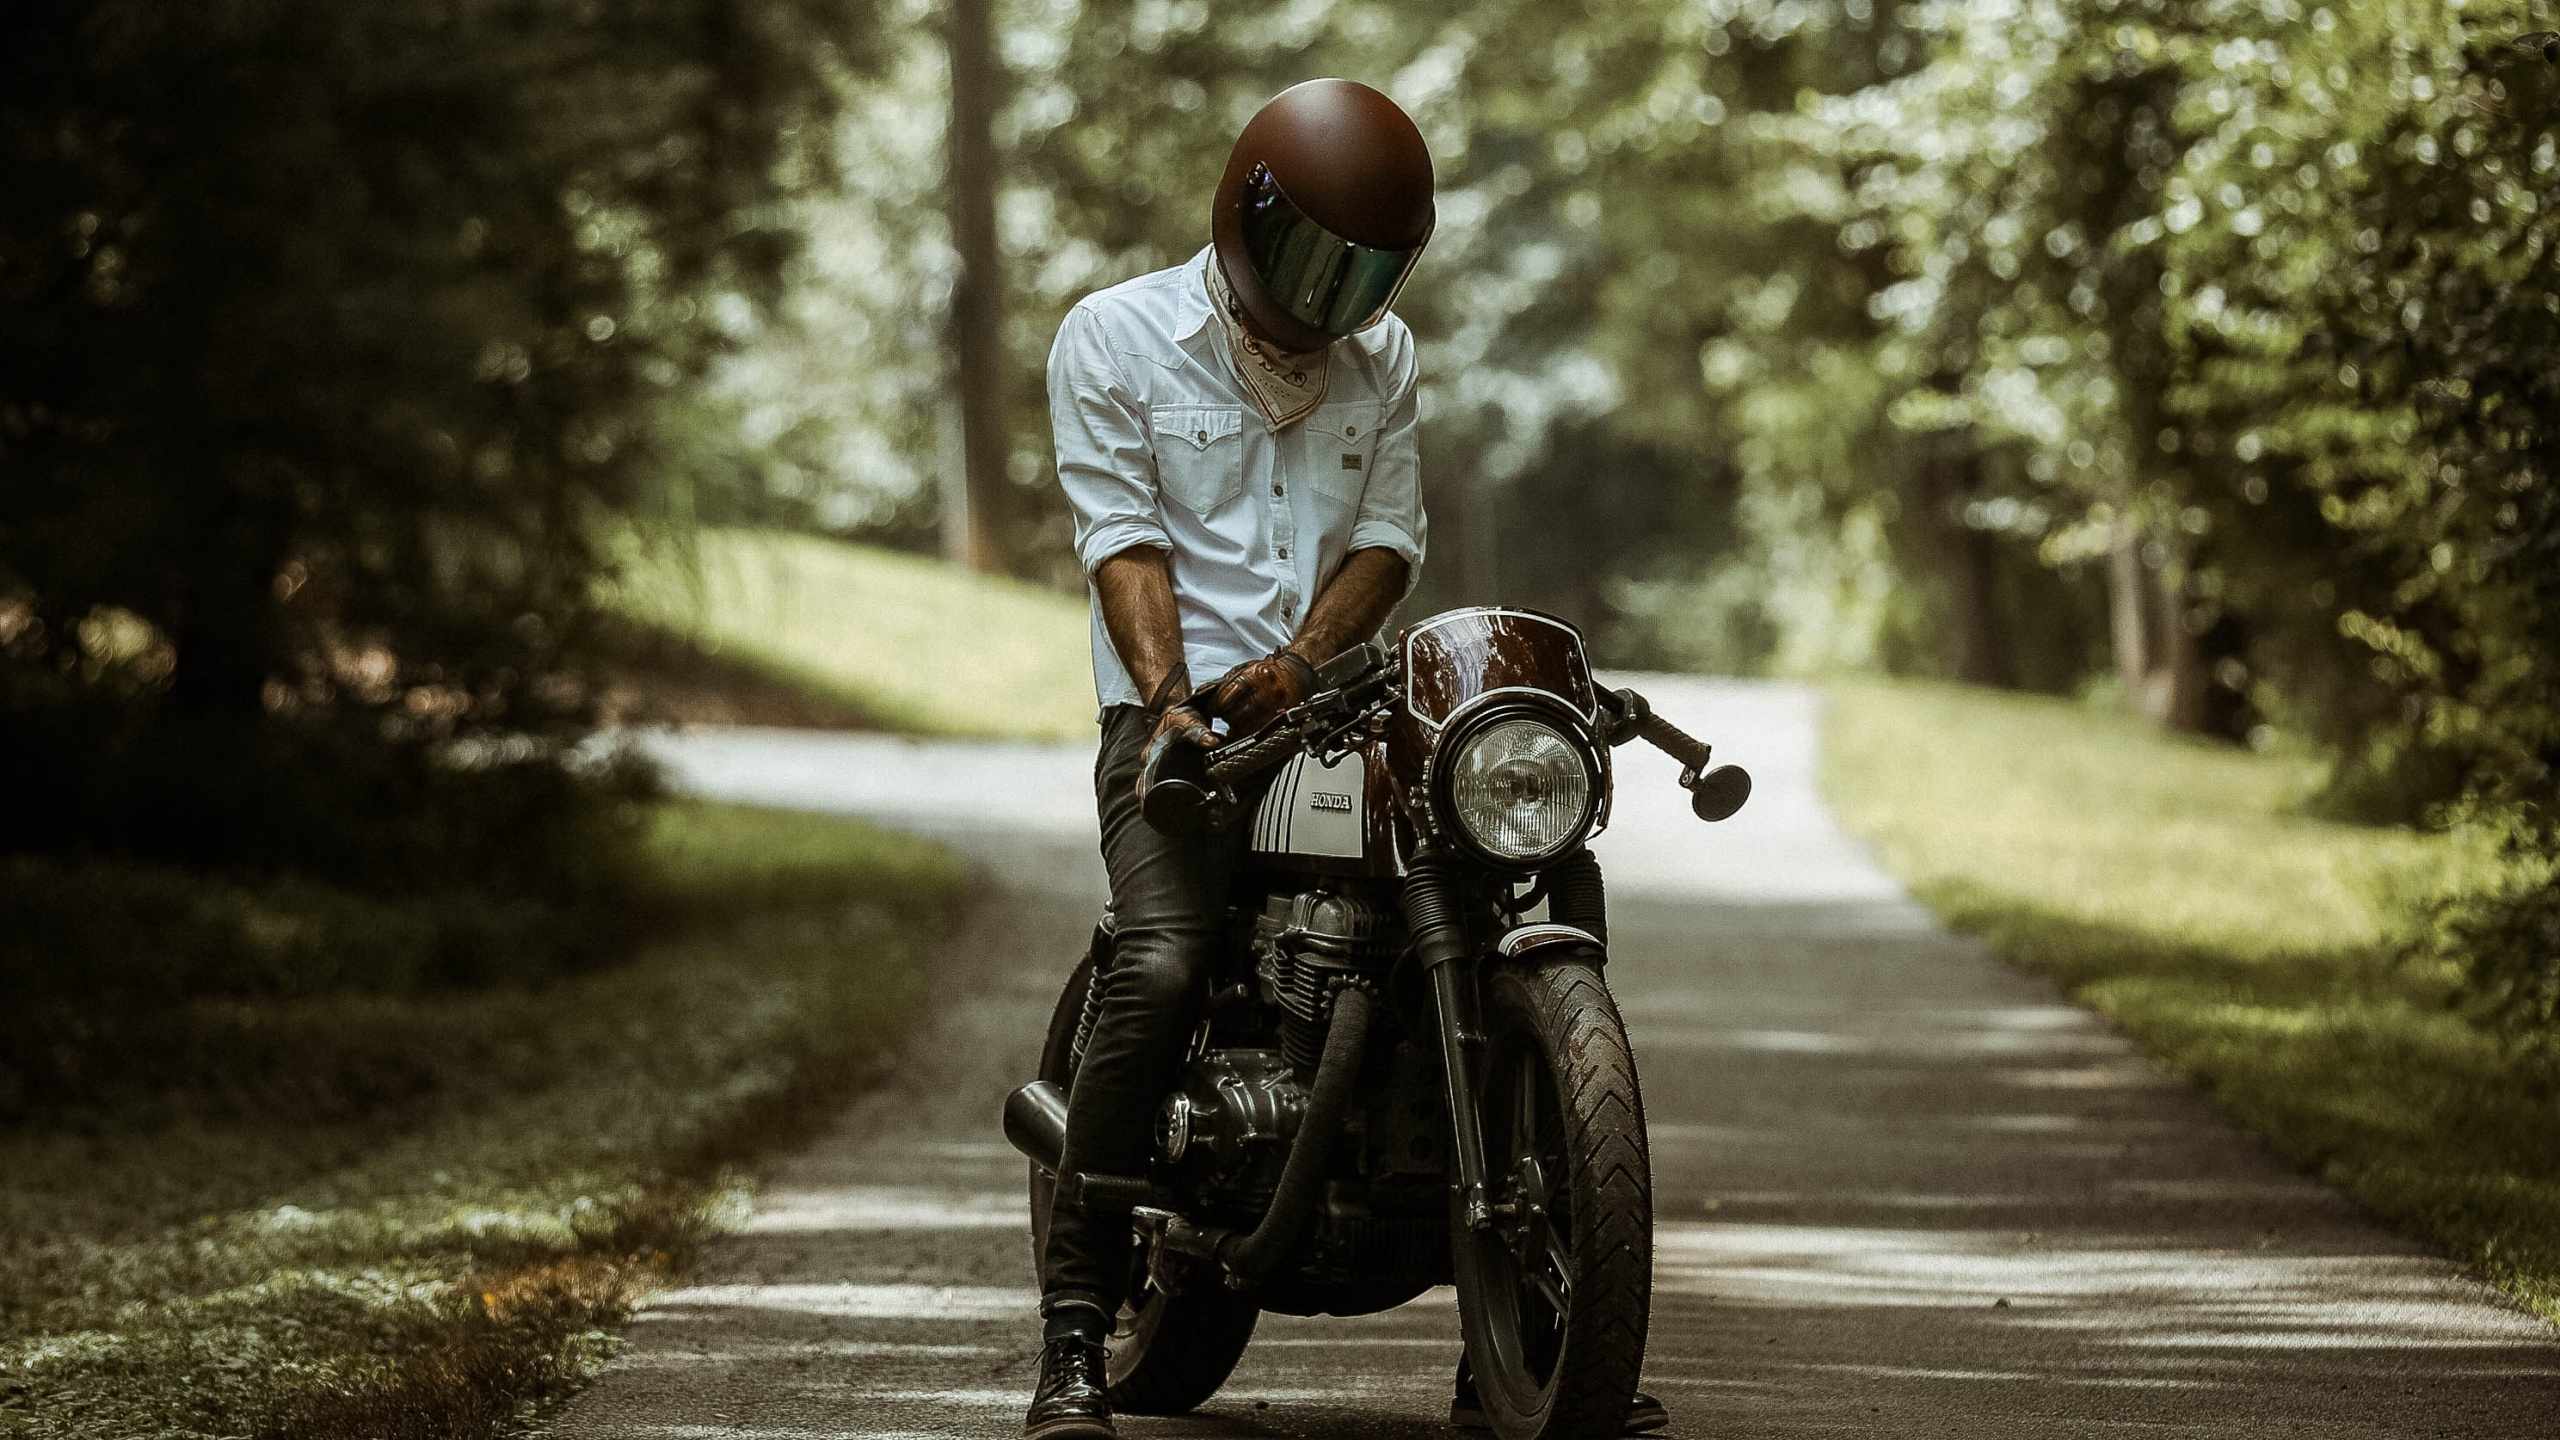 Man in White Shirt Riding Motorcycle on Road During Daytime. Wallpaper in 2560x1440 Resolution